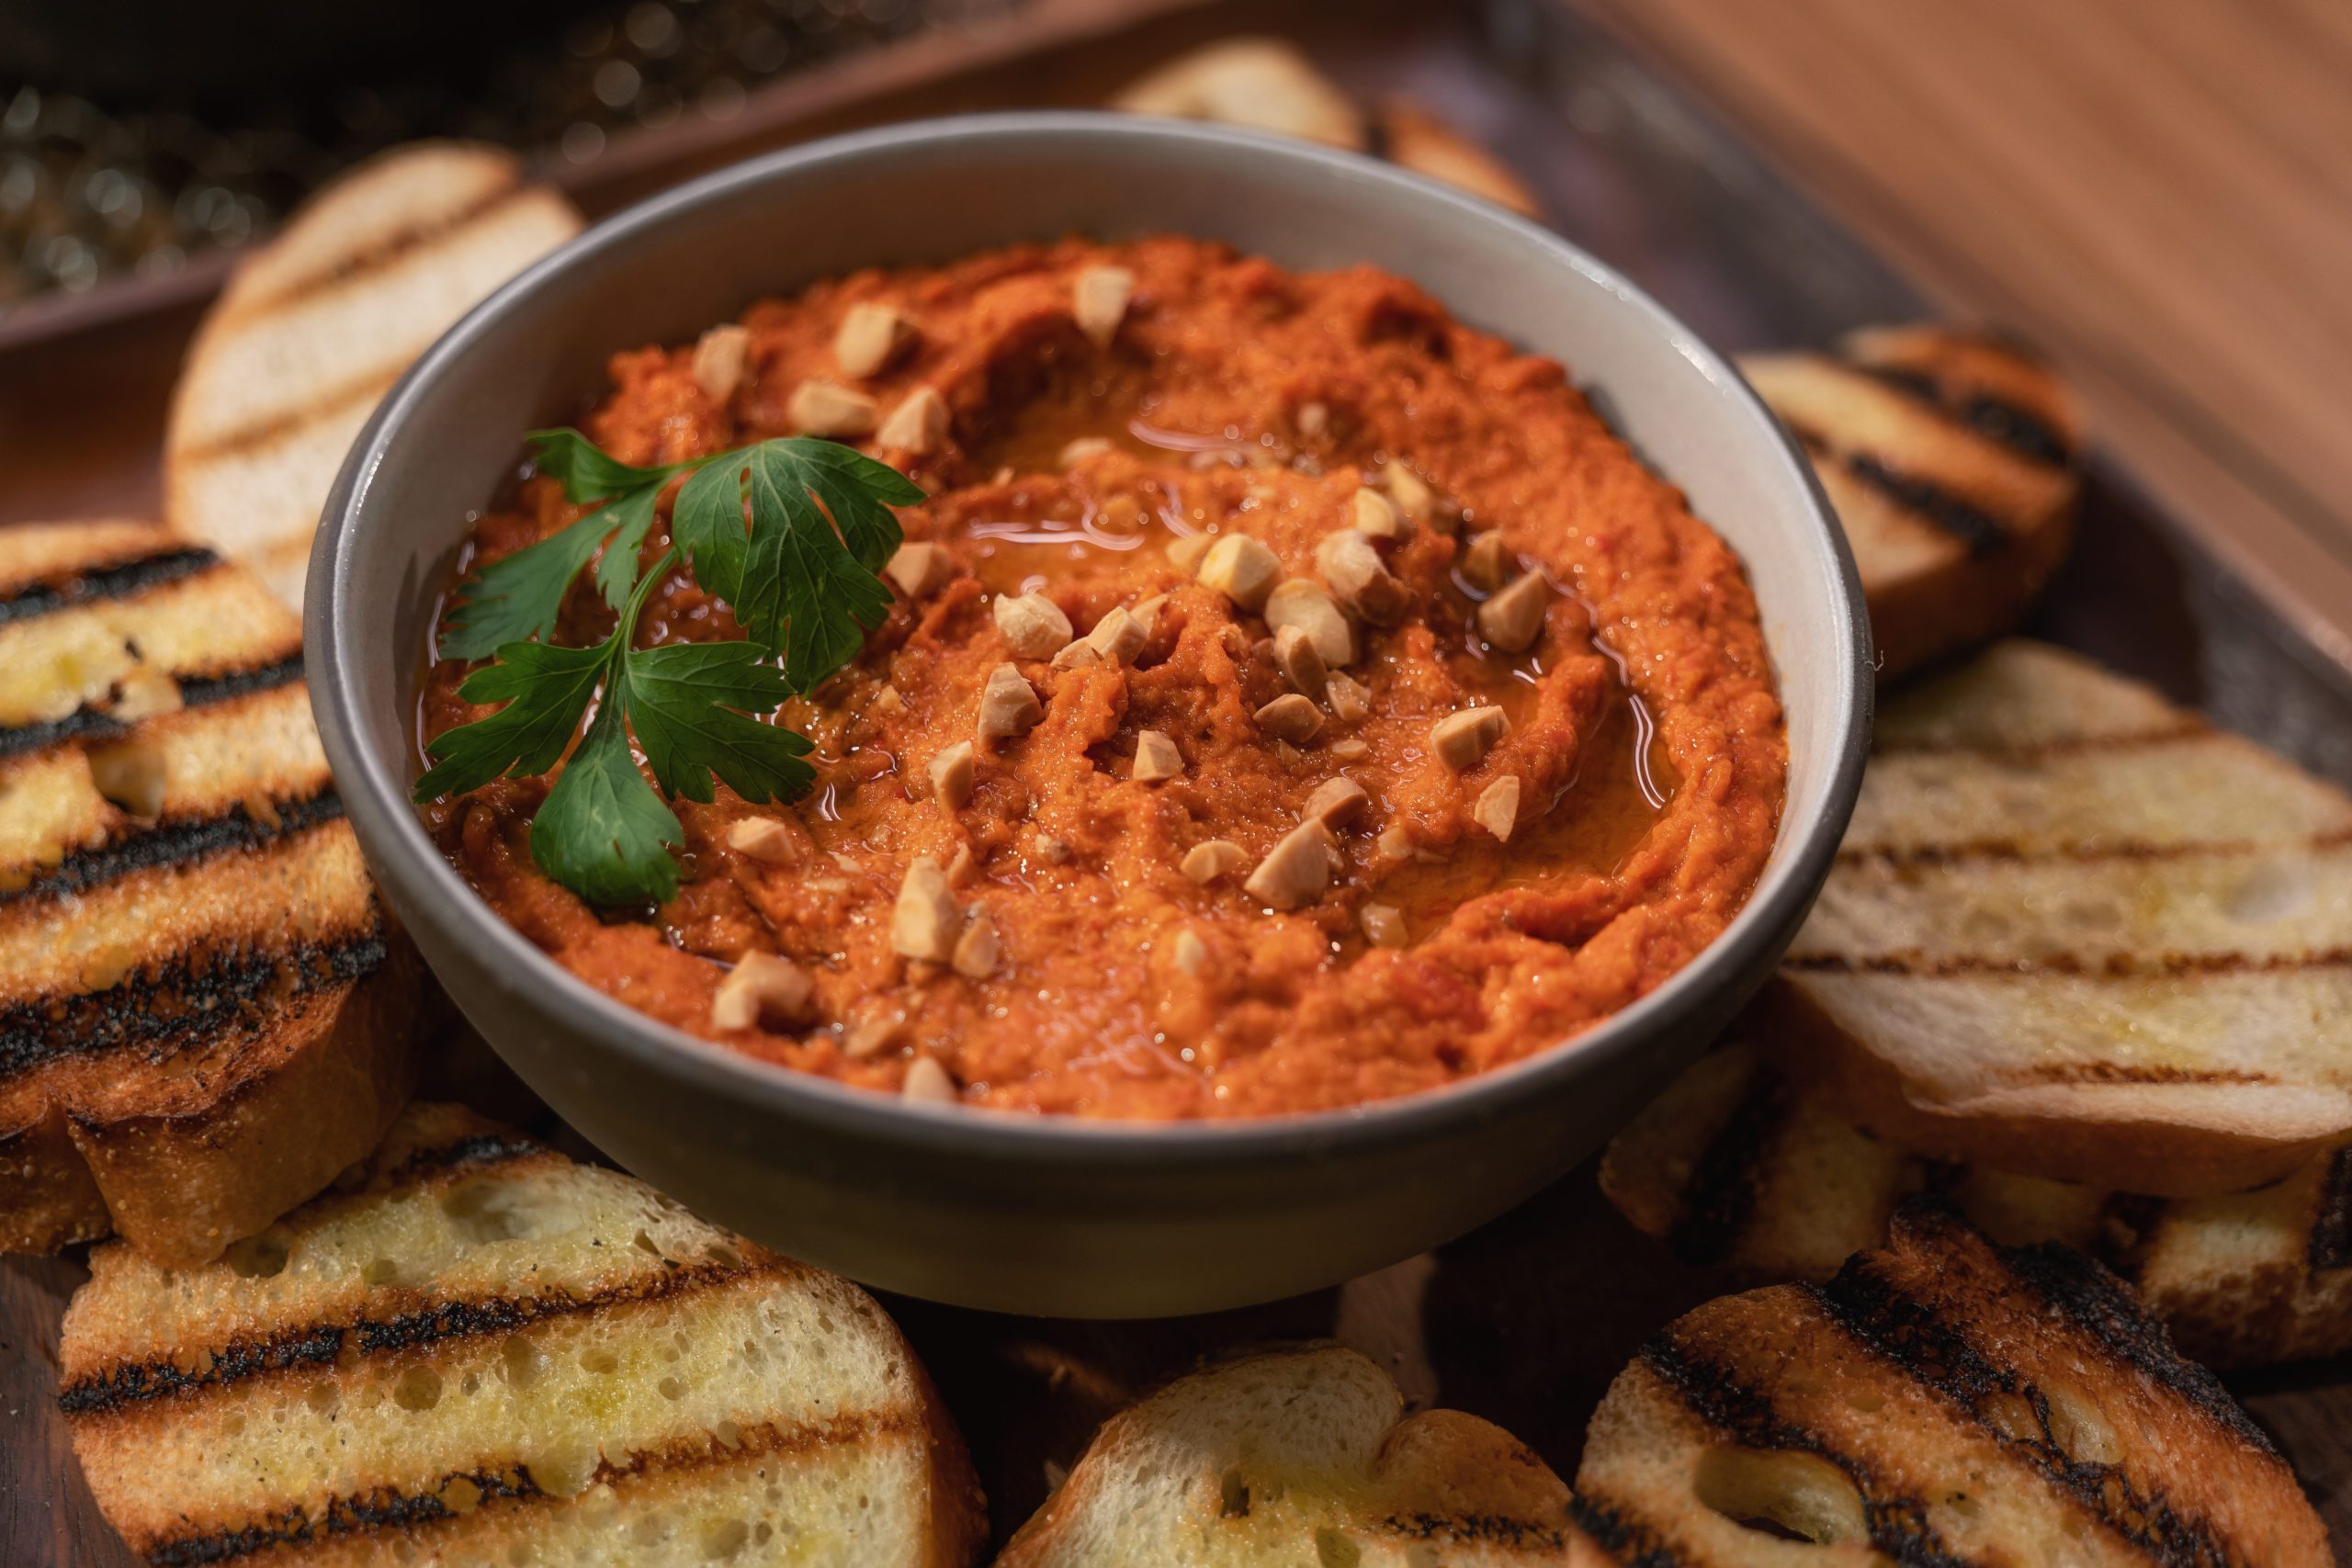 Smoky romesco sauce in a grey bowl surrounded by pieces of grilled, toasted baguette.